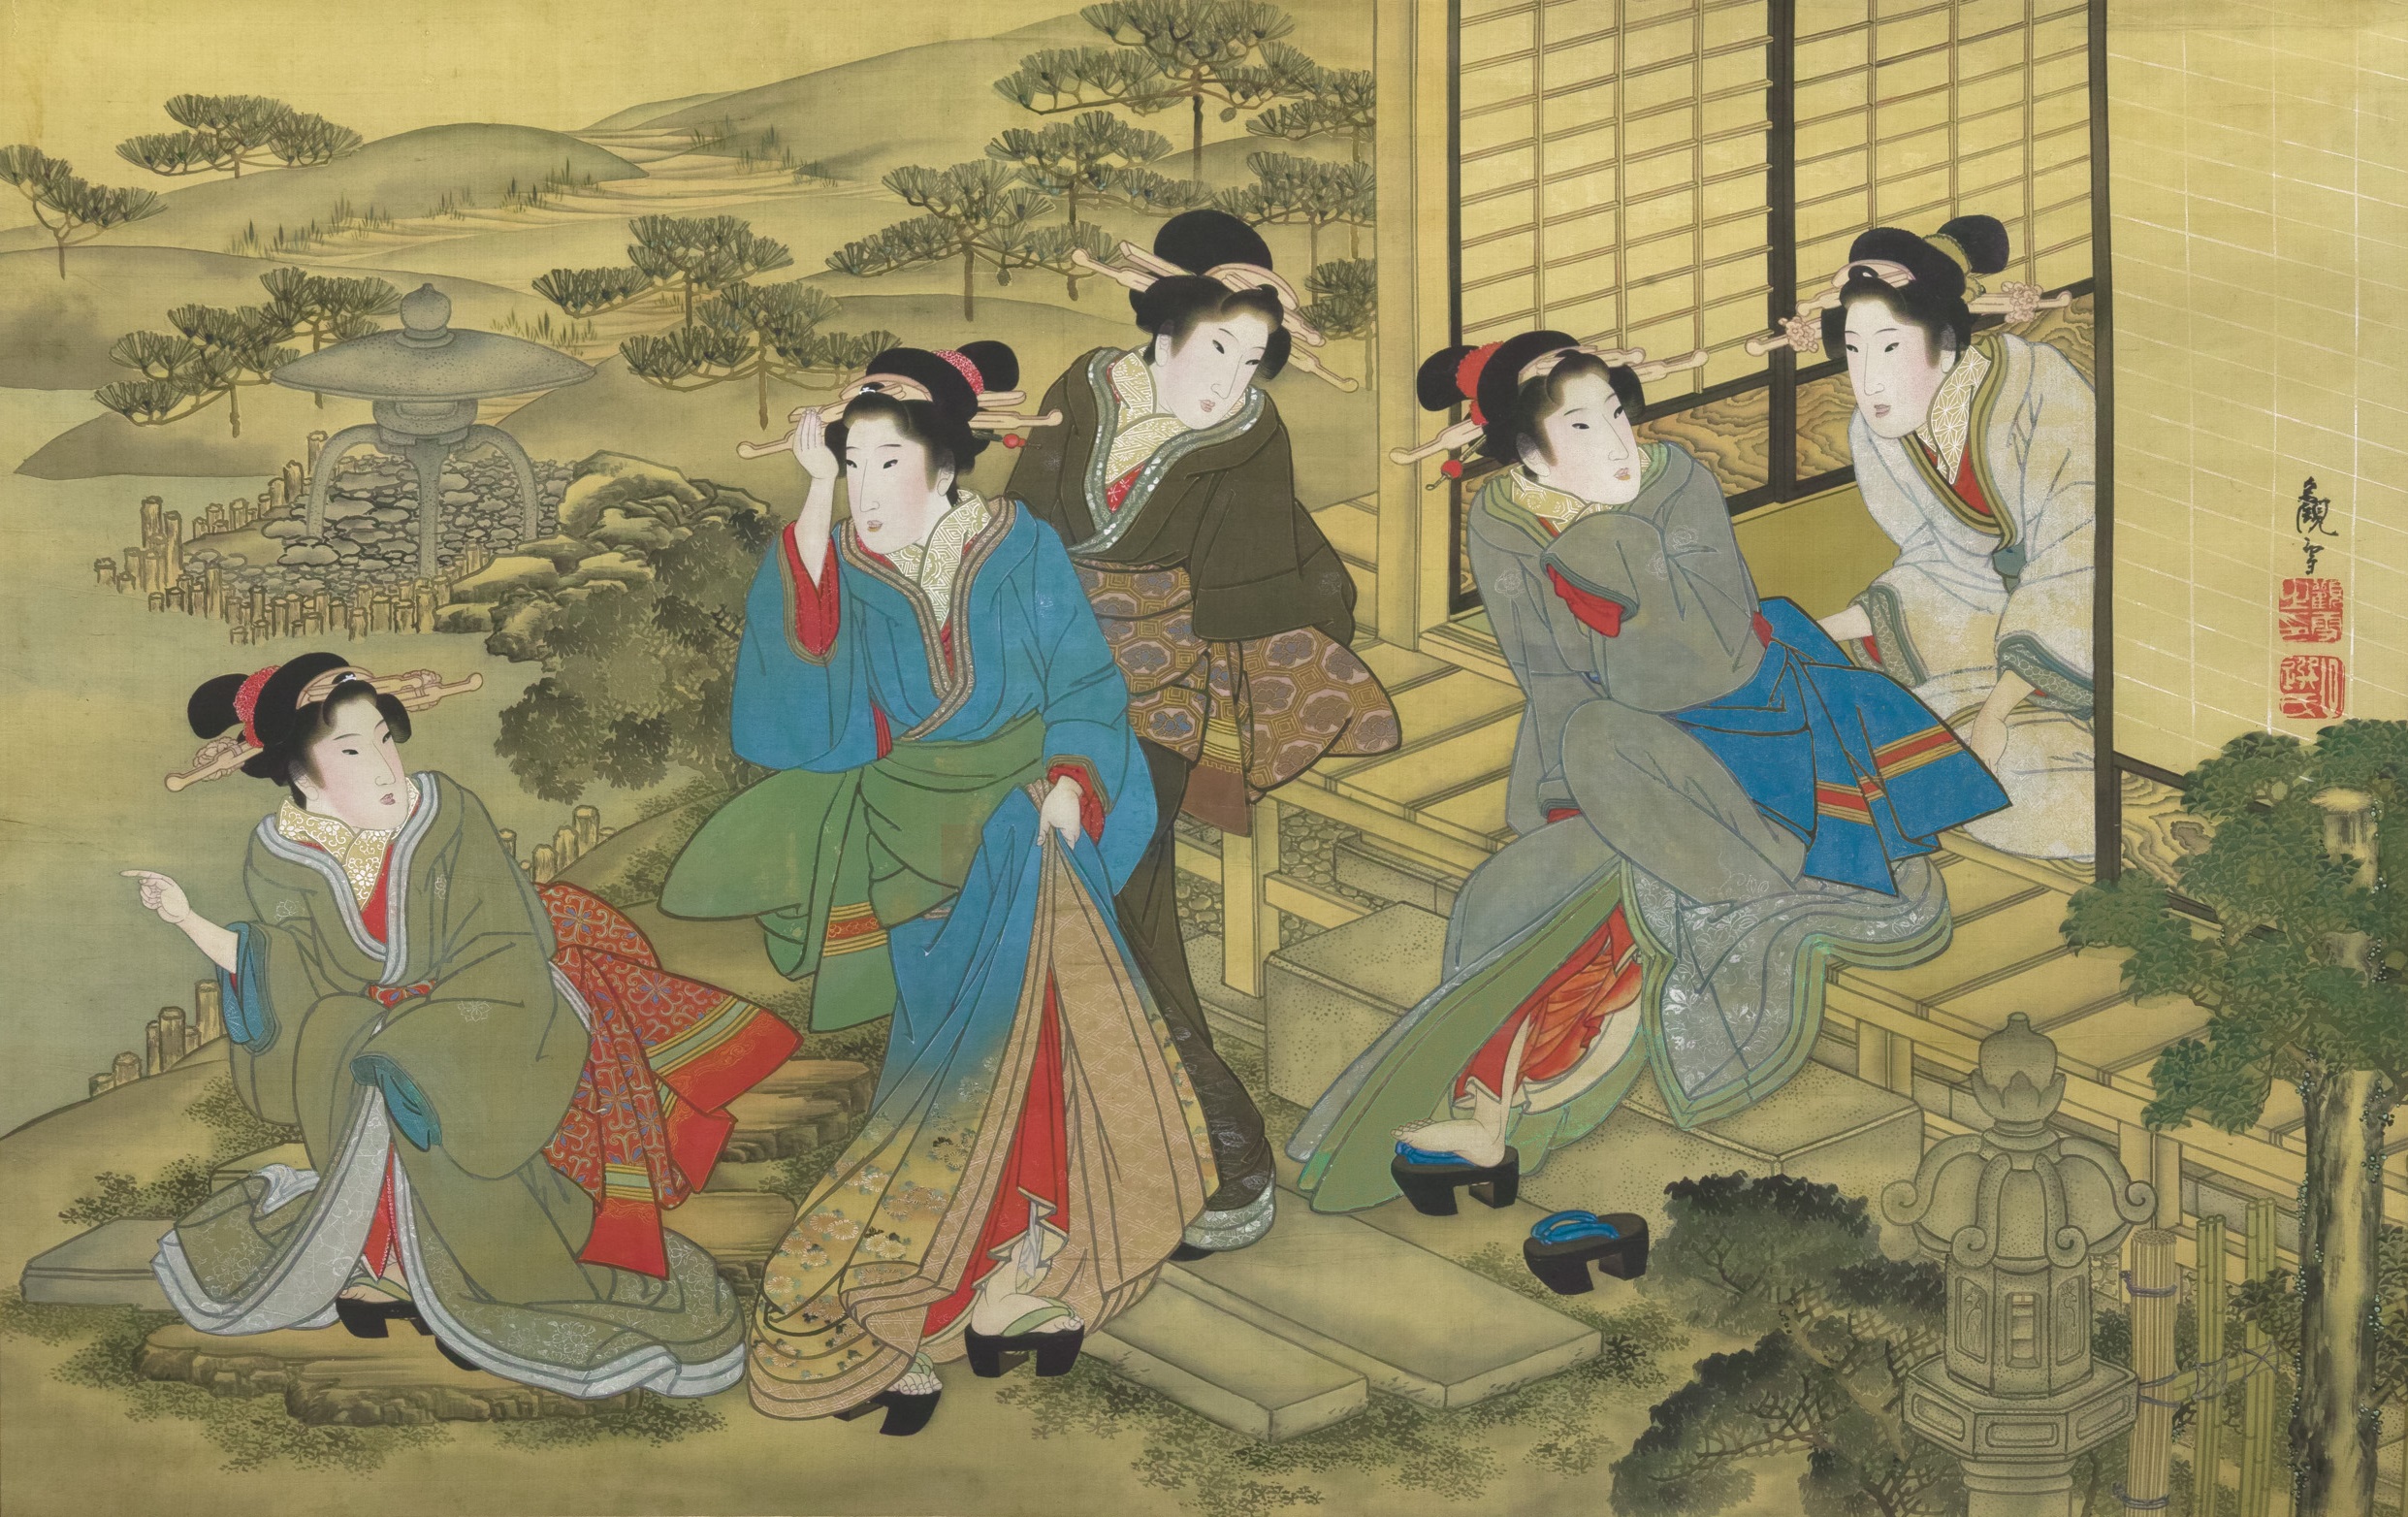 Rare and extraordinary art from Japan’s Edo period on show at Auckland